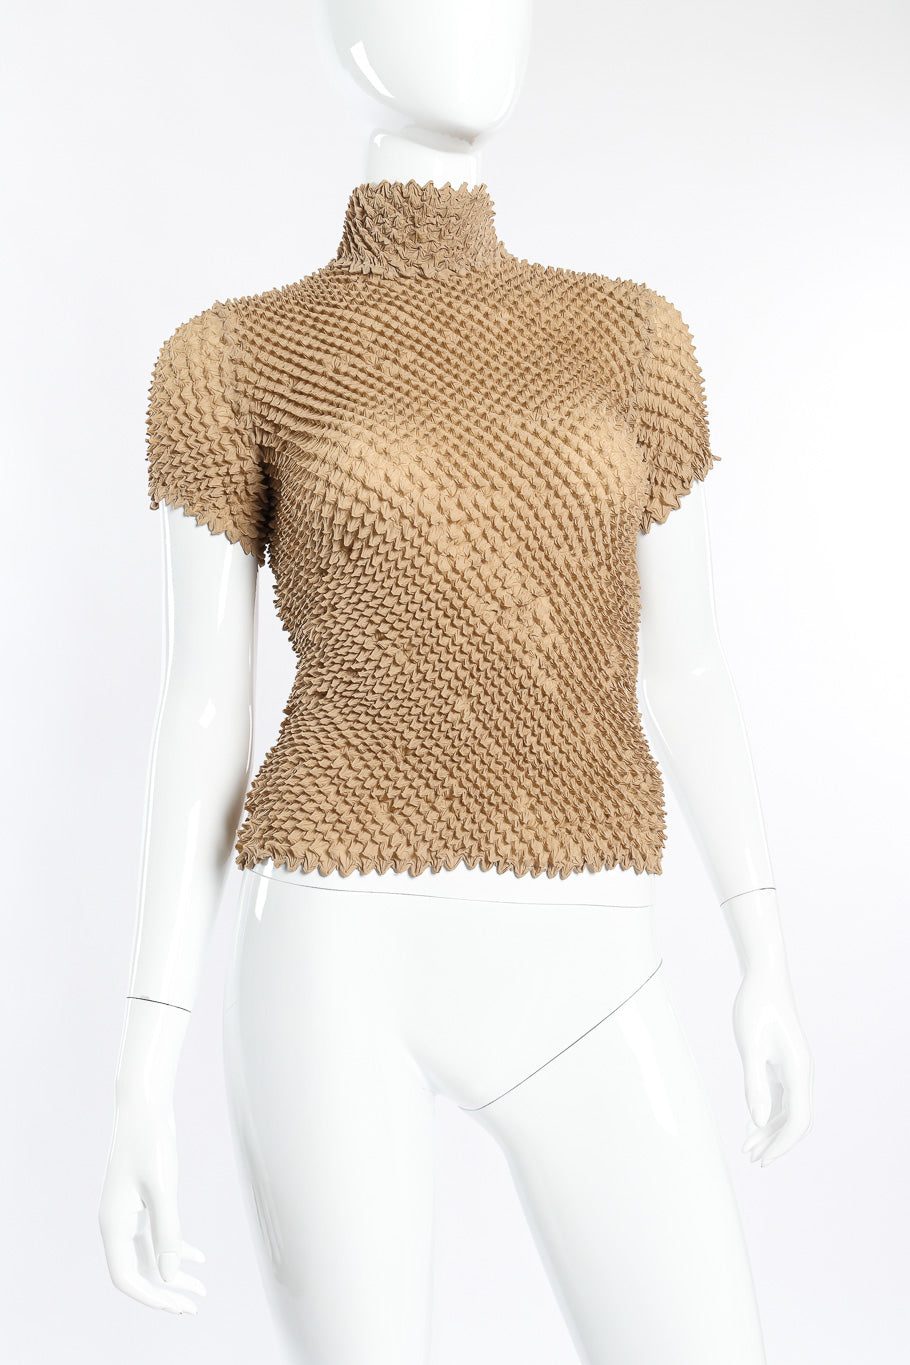 Issey Miyake Spiked Pleat Top front view on mannequin at @Recessla